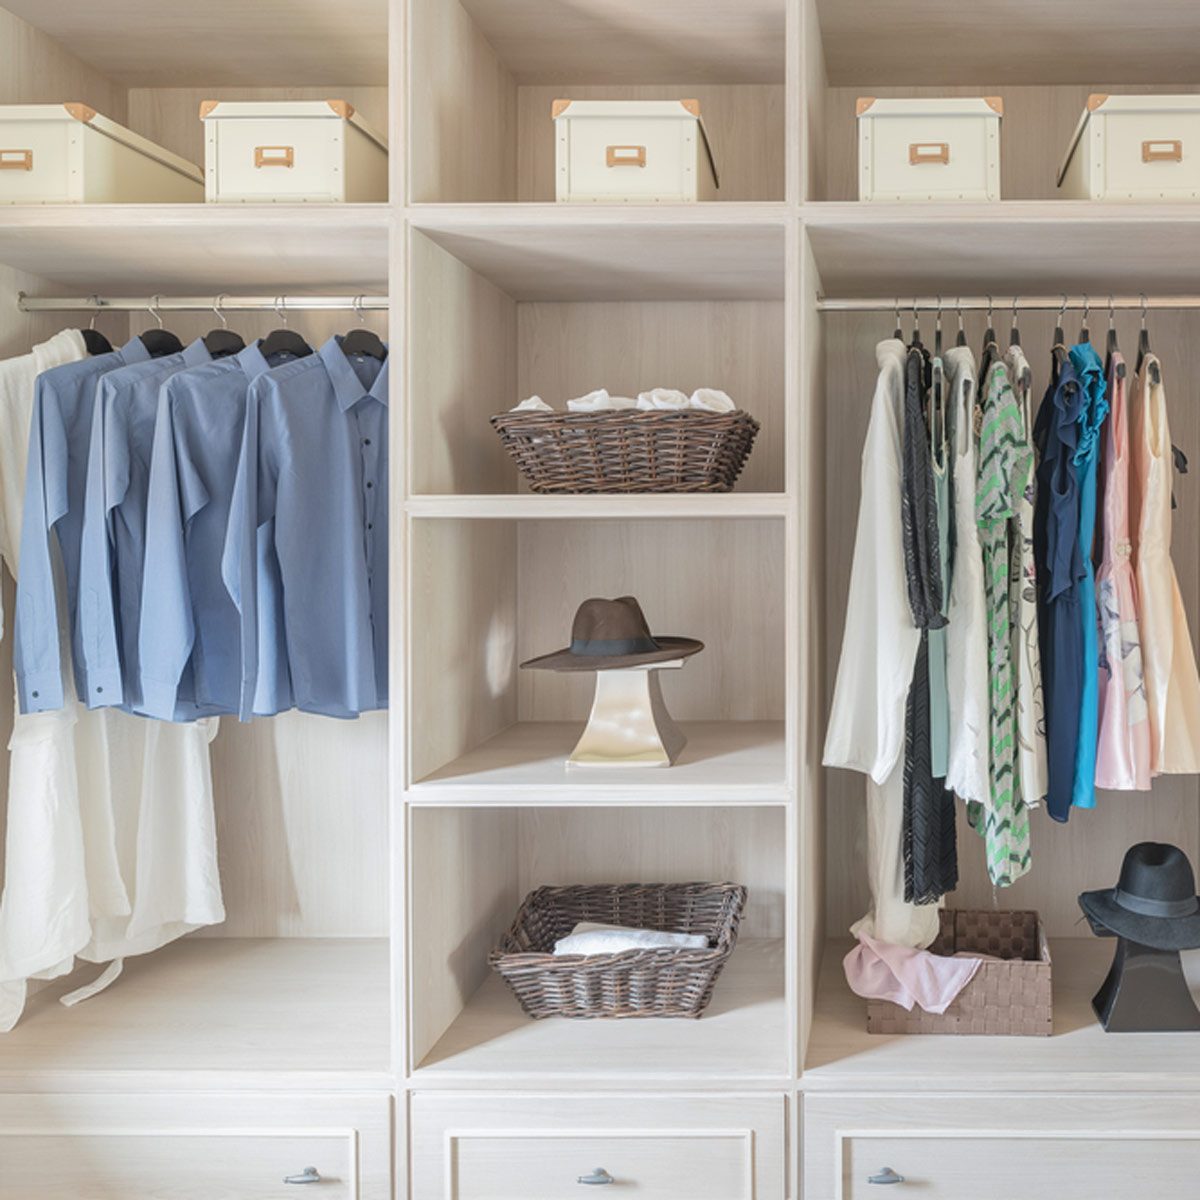 His and Her Closet